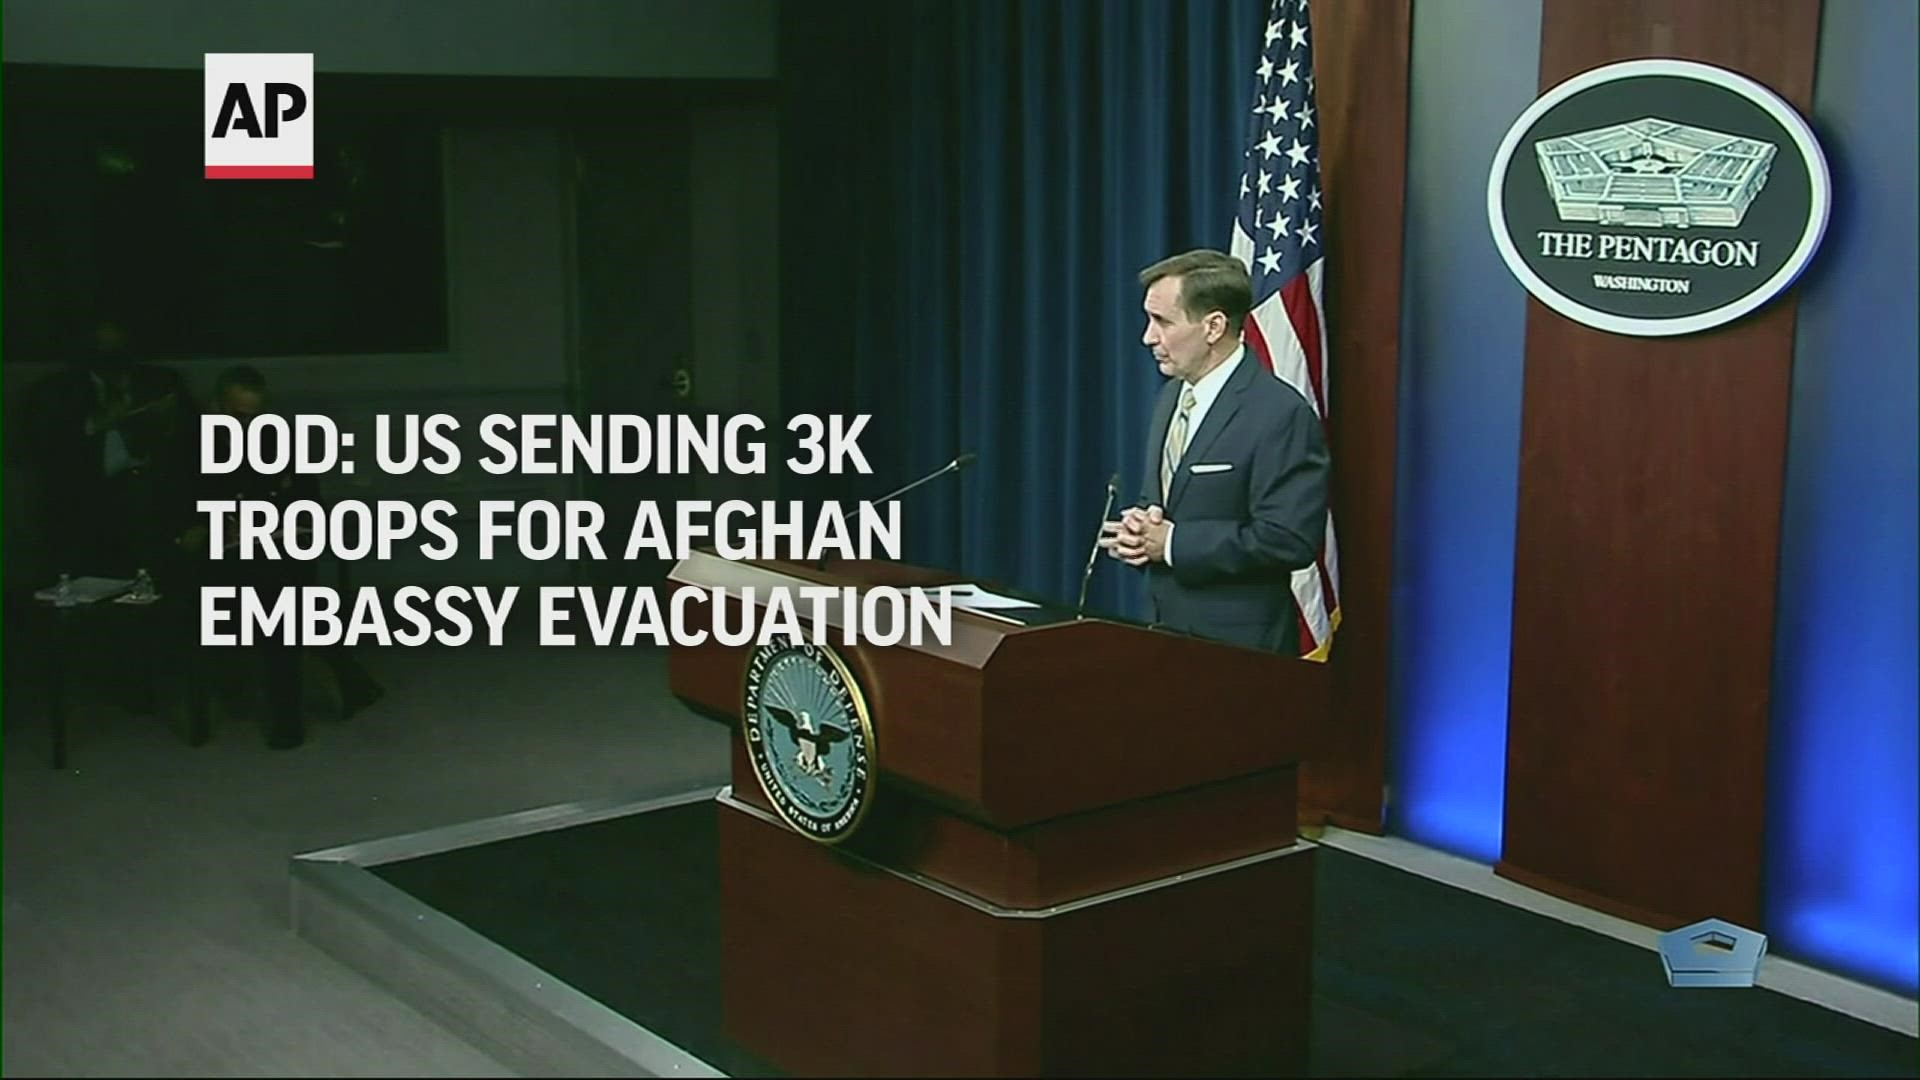 The additional troops will assist in the evacuation of some personnel from the U.S. Embassy in Kabul.